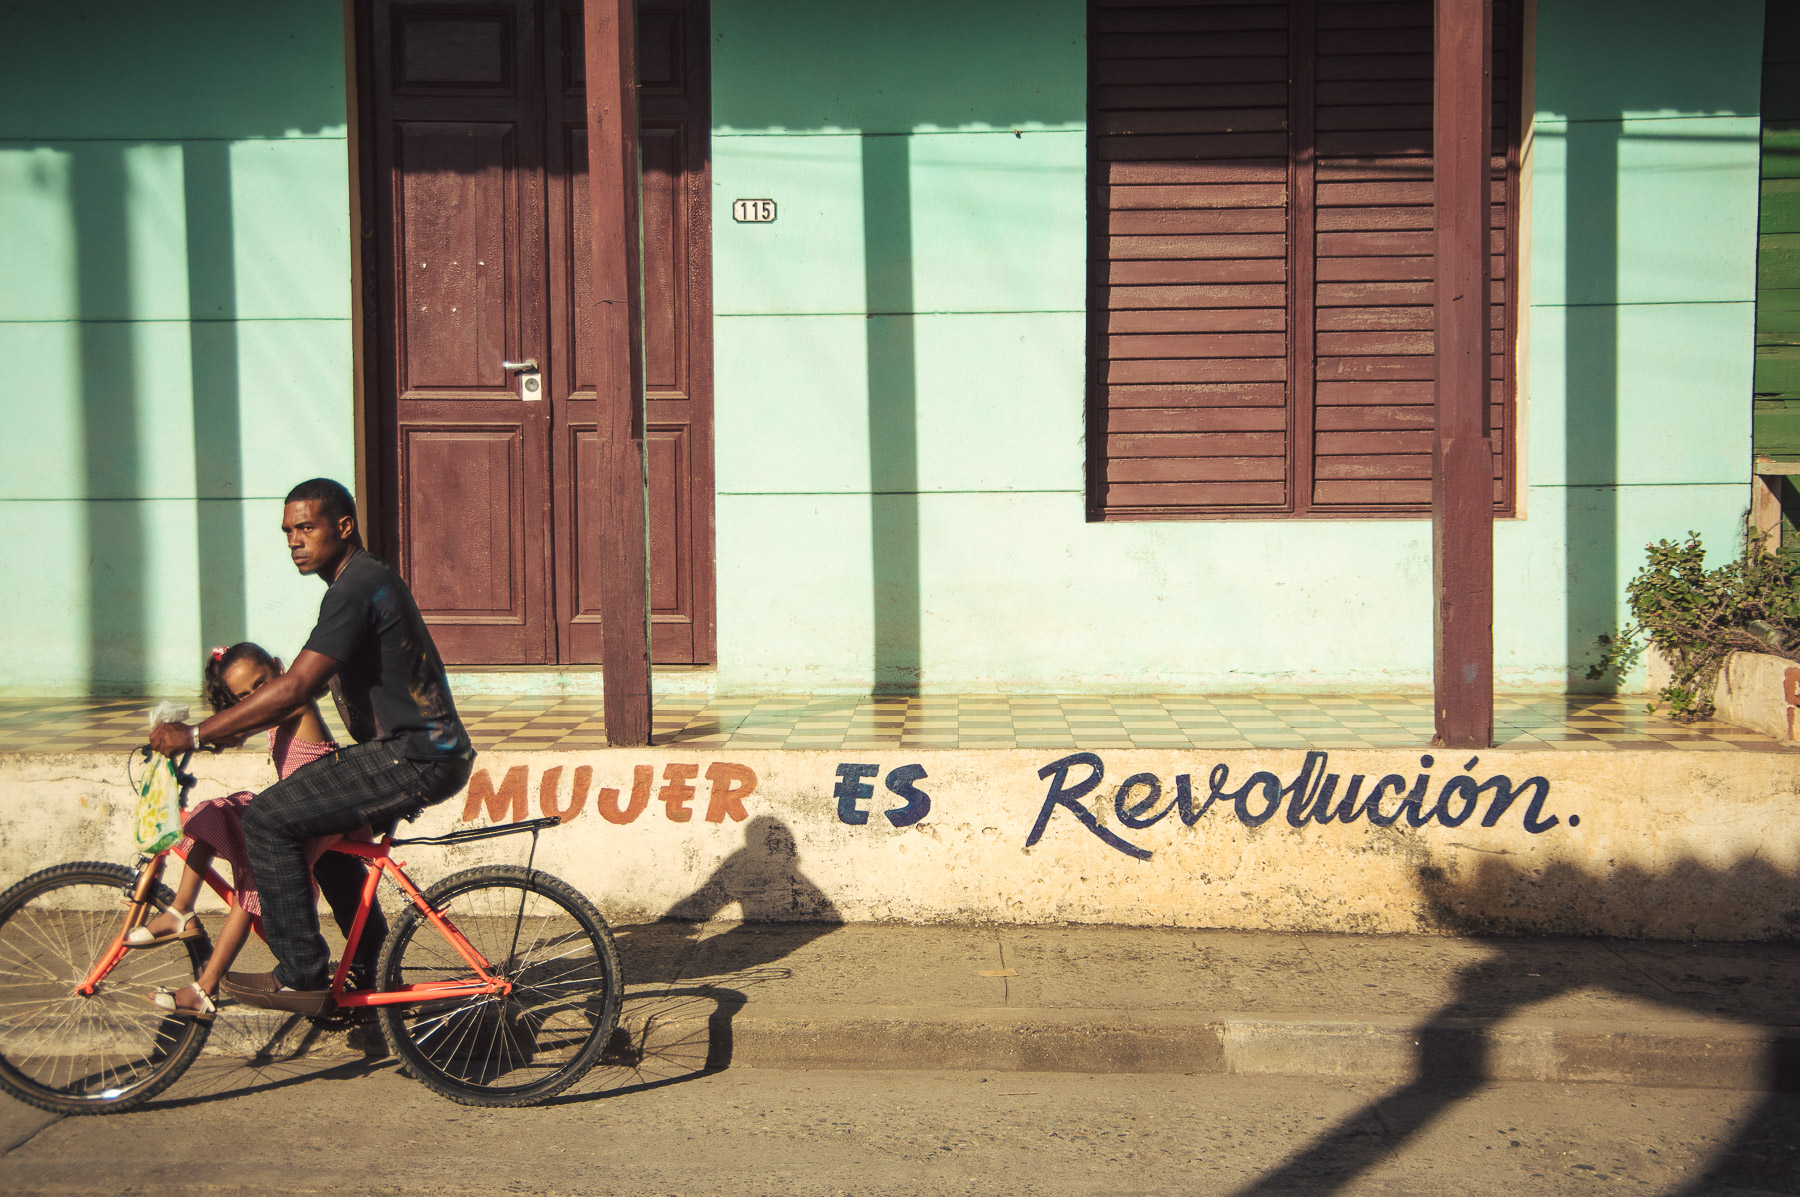 ''Woman is Revolution''. Equality has always been at the core of Cuban life. There is still a lot unknown in regard to the shape society will take in the future.